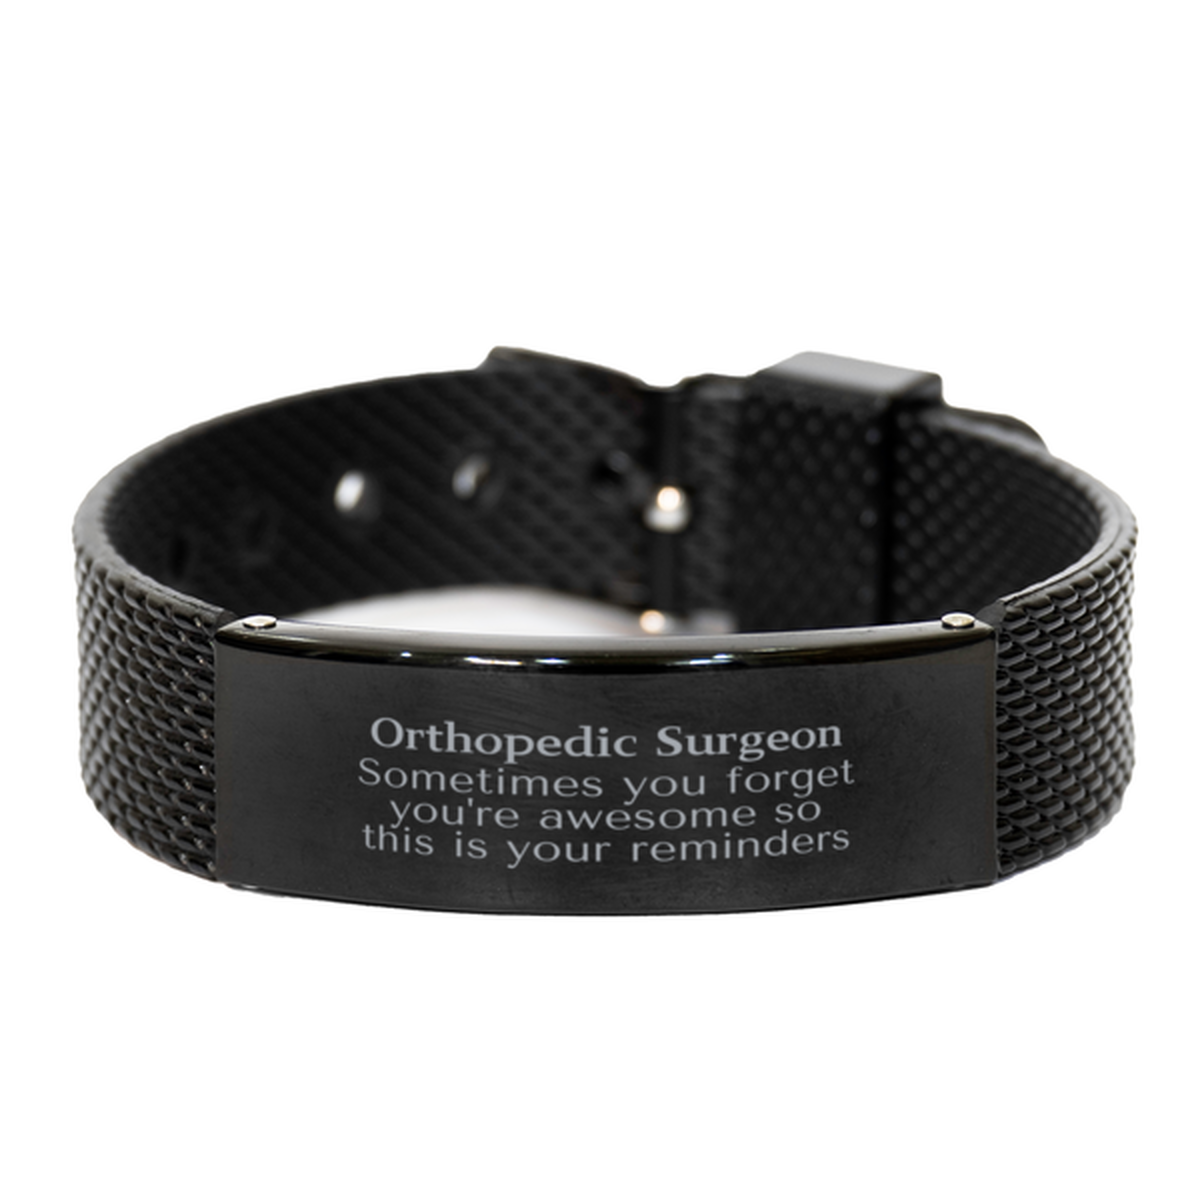 Sentimental Orthopedic Surgeon Black Shark Mesh Bracelet, Orthopedic Surgeon Sometimes you forget you're awesome so this is your reminders, Graduation Christmas Birthday Gifts for Orthopedic Surgeon, Men, Women, Coworkers